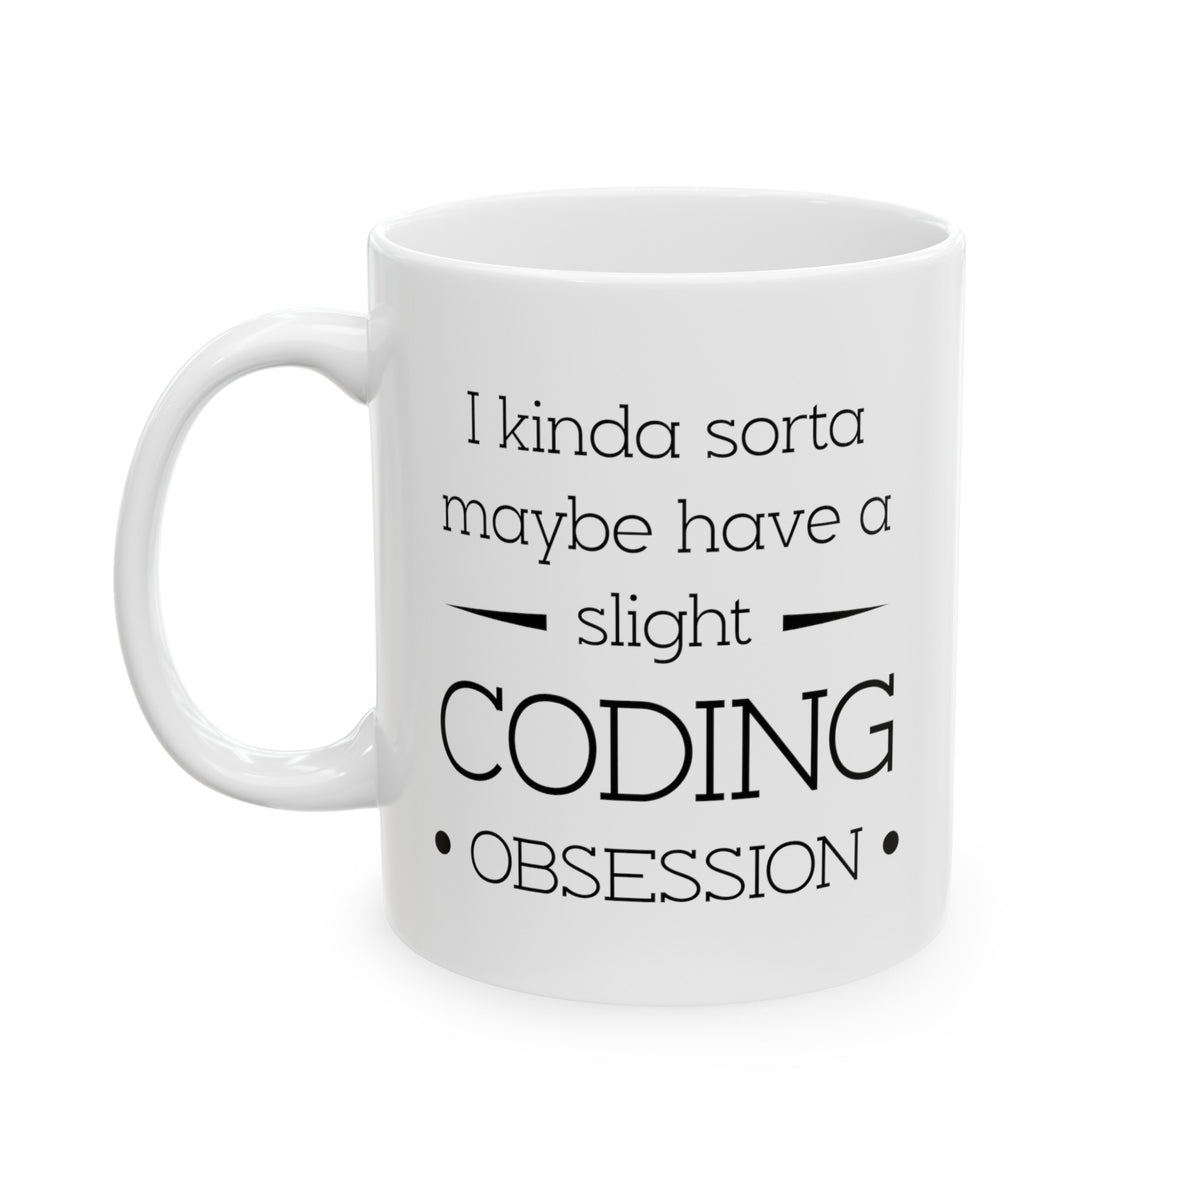 Best Programmer Coffee Mug - I kinda sorta maybe have a slight Coding obsession! Cup - Funny Computer Coding Gifts